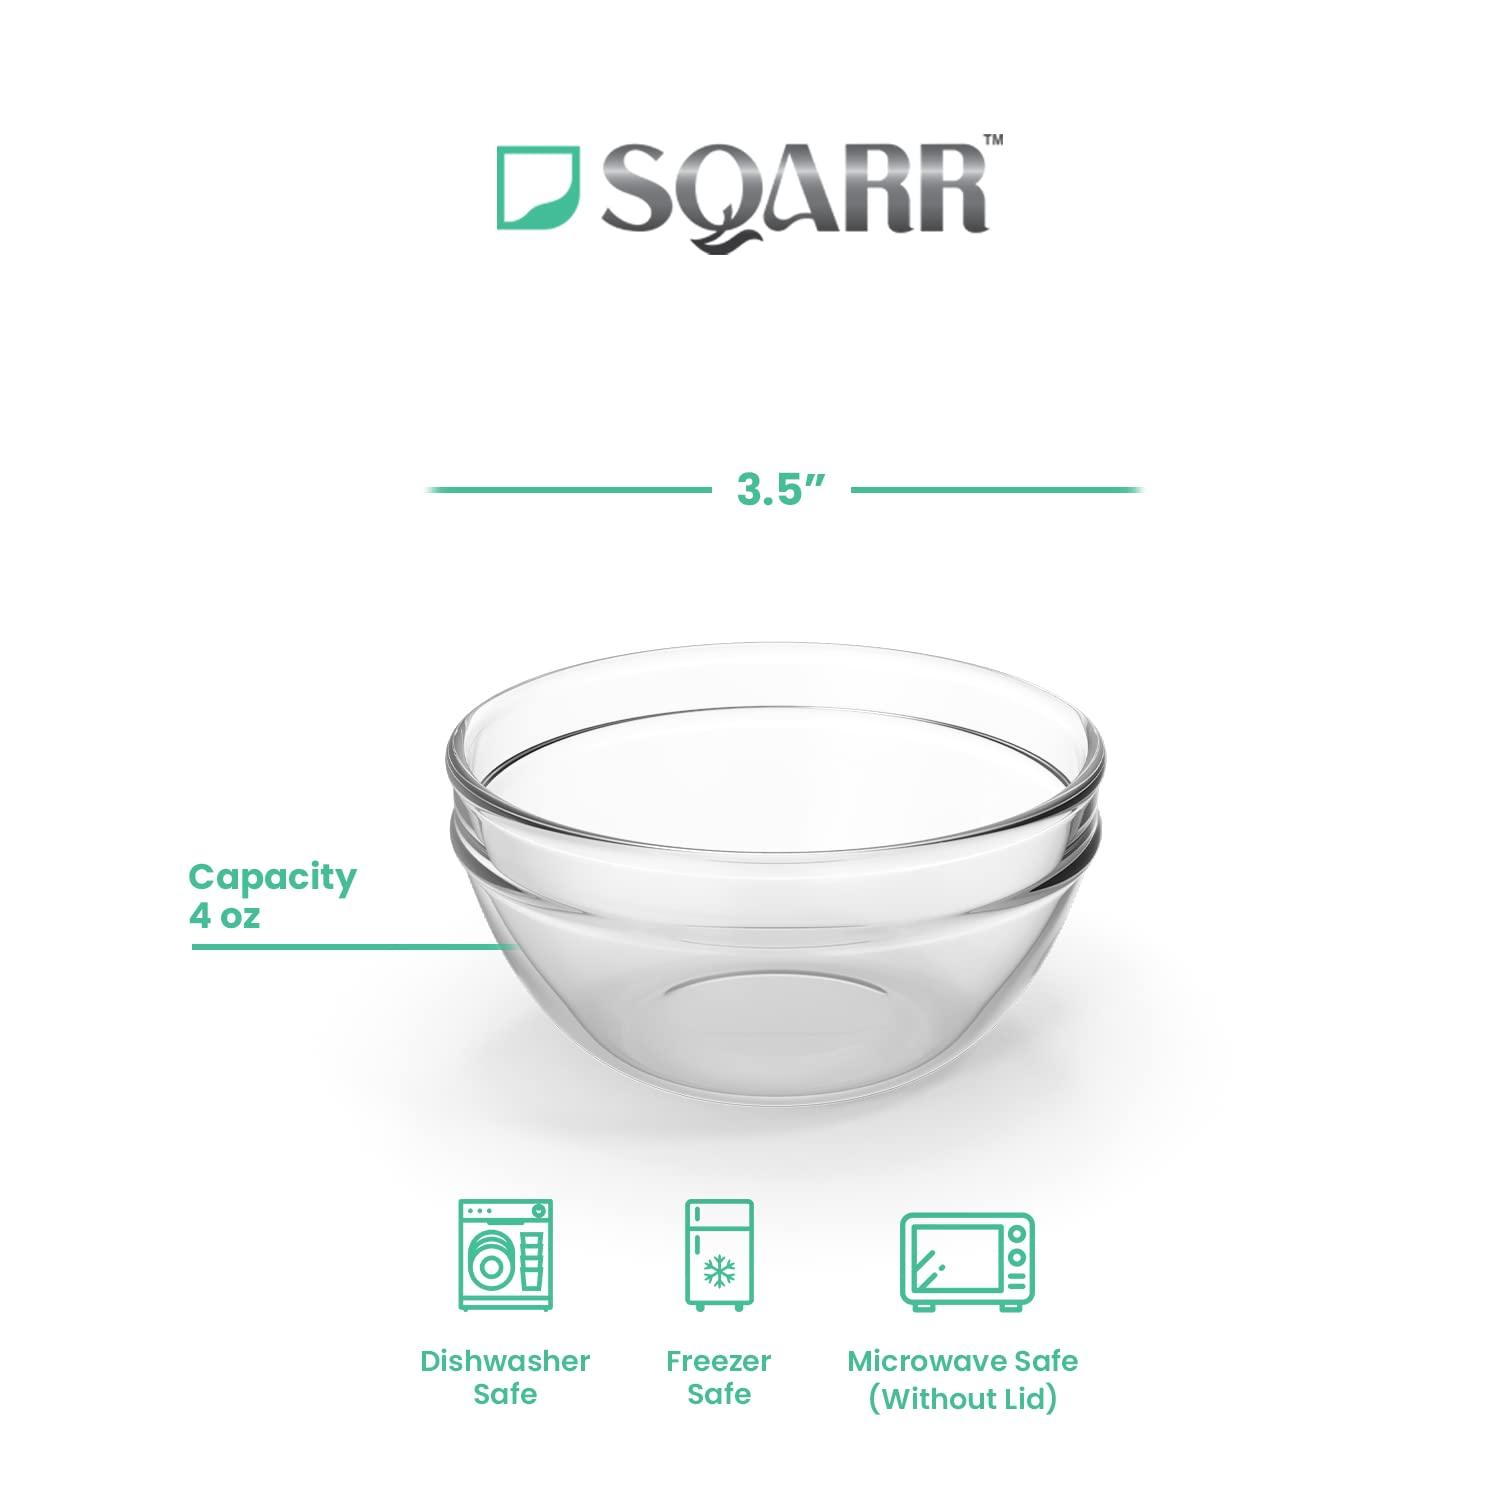 SQARR Small Glass Bowls with Lids - Perfect Prep Bowls for Kitchen Lovers - Mini Bowls for Candy, Dessert, Nuts, Party, Dips, Condiments, Sauces, Ingredients (12 set) - CookCave